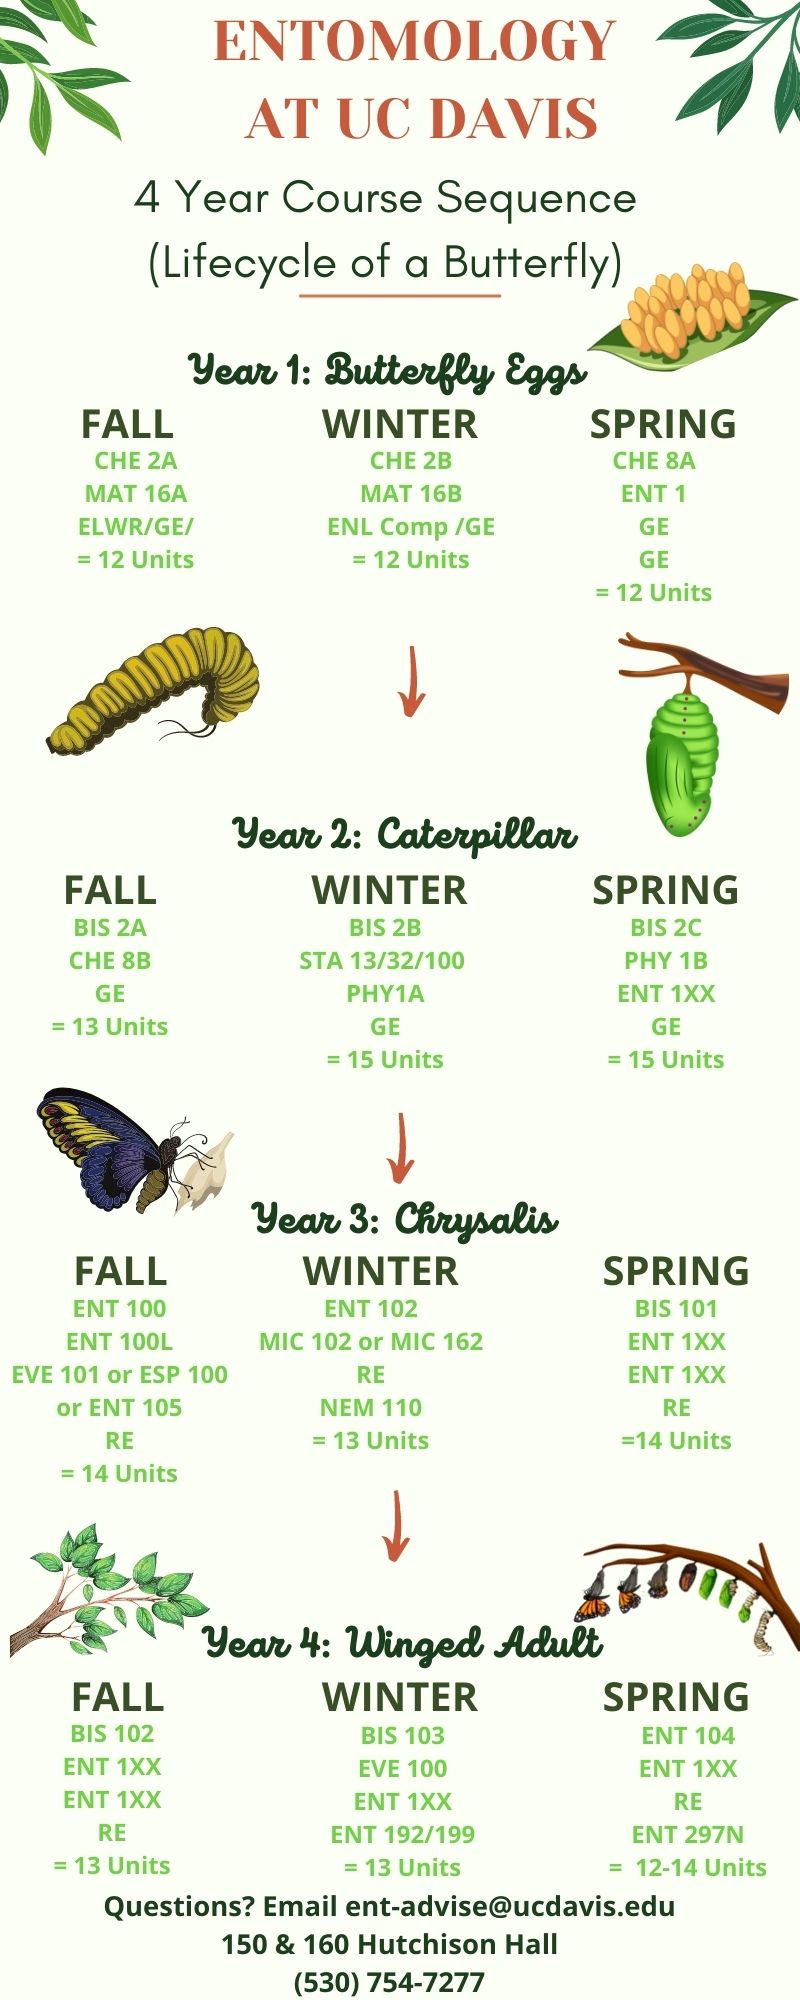 Entomology at UC Davis - 4 Year Course Sequence Graphic, hyperlink to PDF in body text to left.